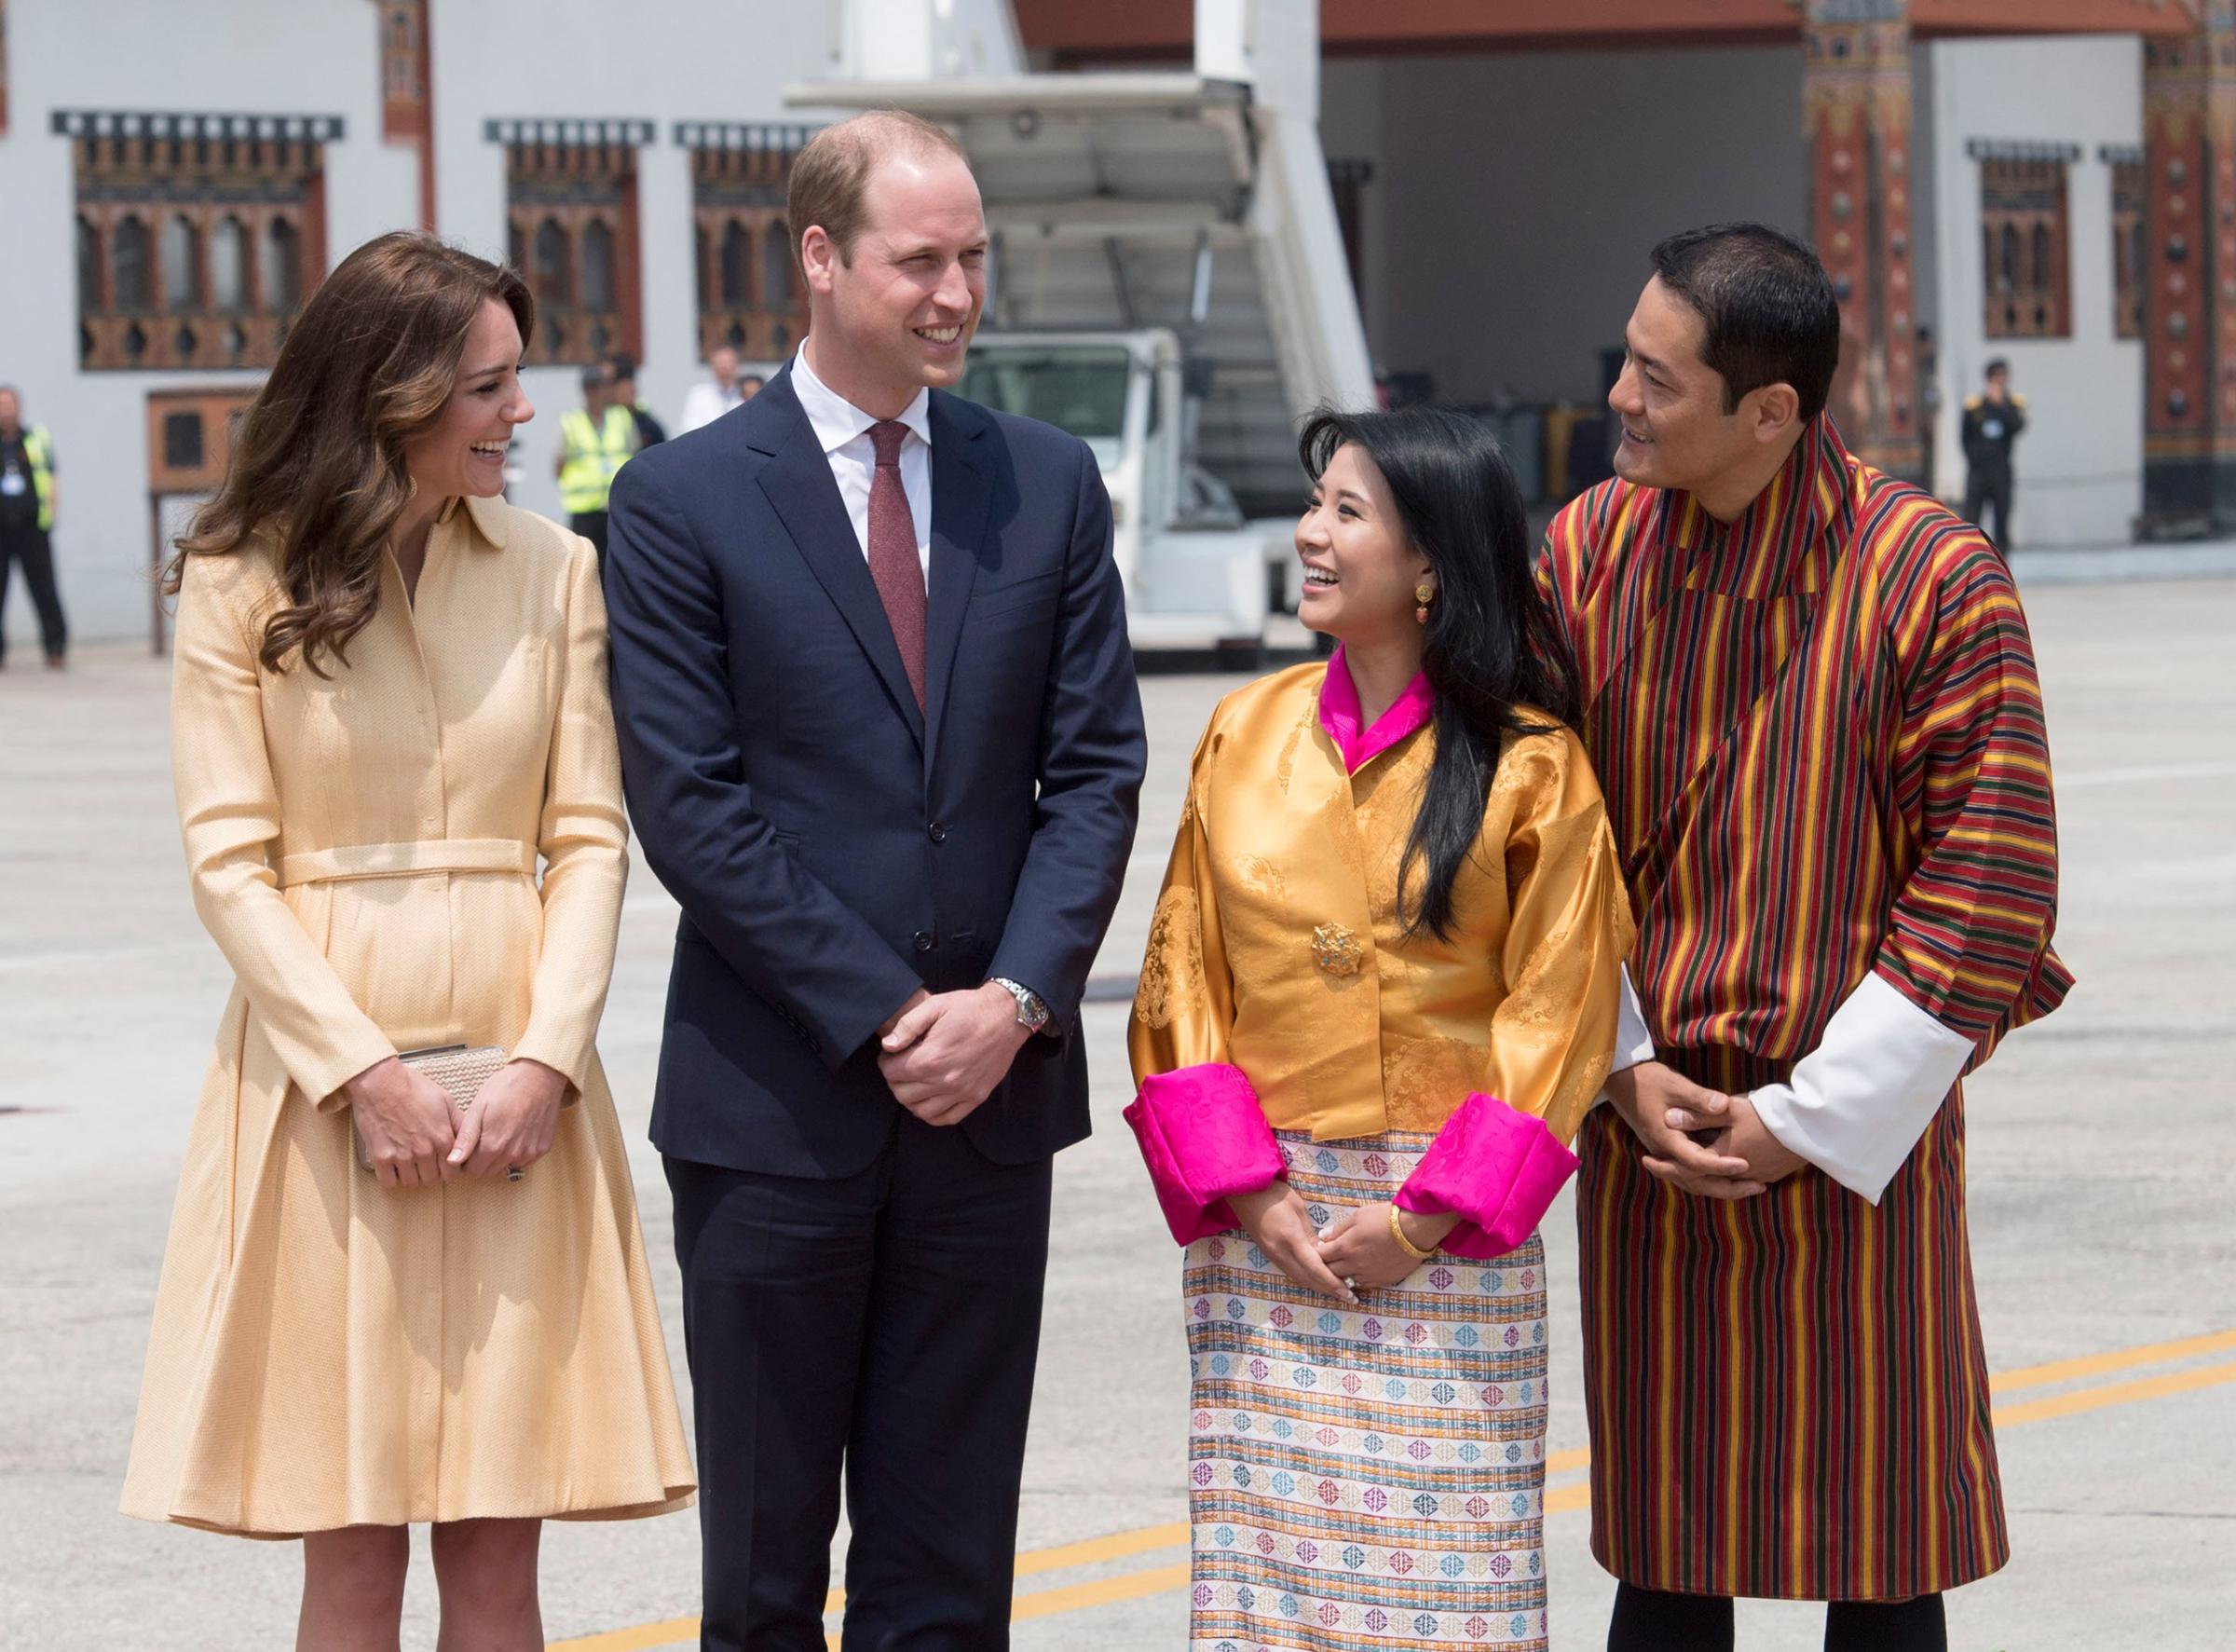 Prince William and Catherine, Duke and Duchess of Cambridge, arrive to meet King Jigme Khesar Namgyel Wangchuck and Queen Jetsun Pema at Paro International Airport in Bhutan, April 14, 2016.